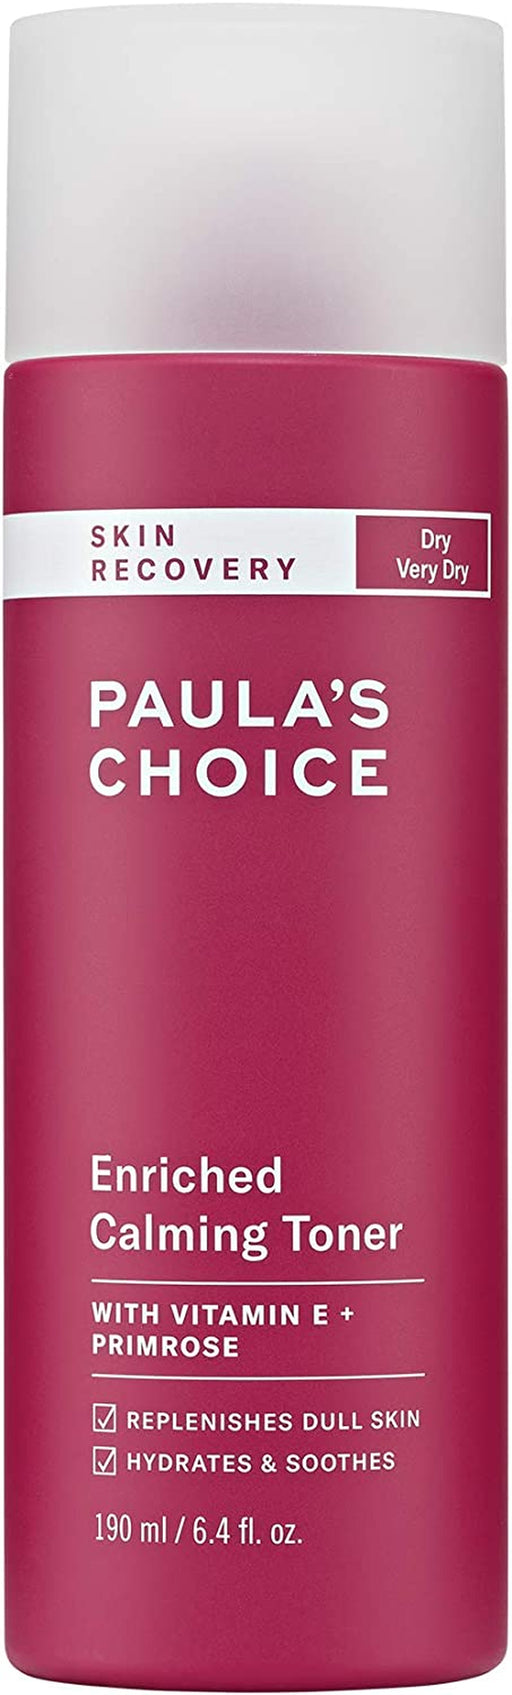 Paula'S Choice Skin Recovery Calming Toner, 6.4 Ounce Bottle Toner for the Face, Sensitive Facial and Dry Redness-Prone